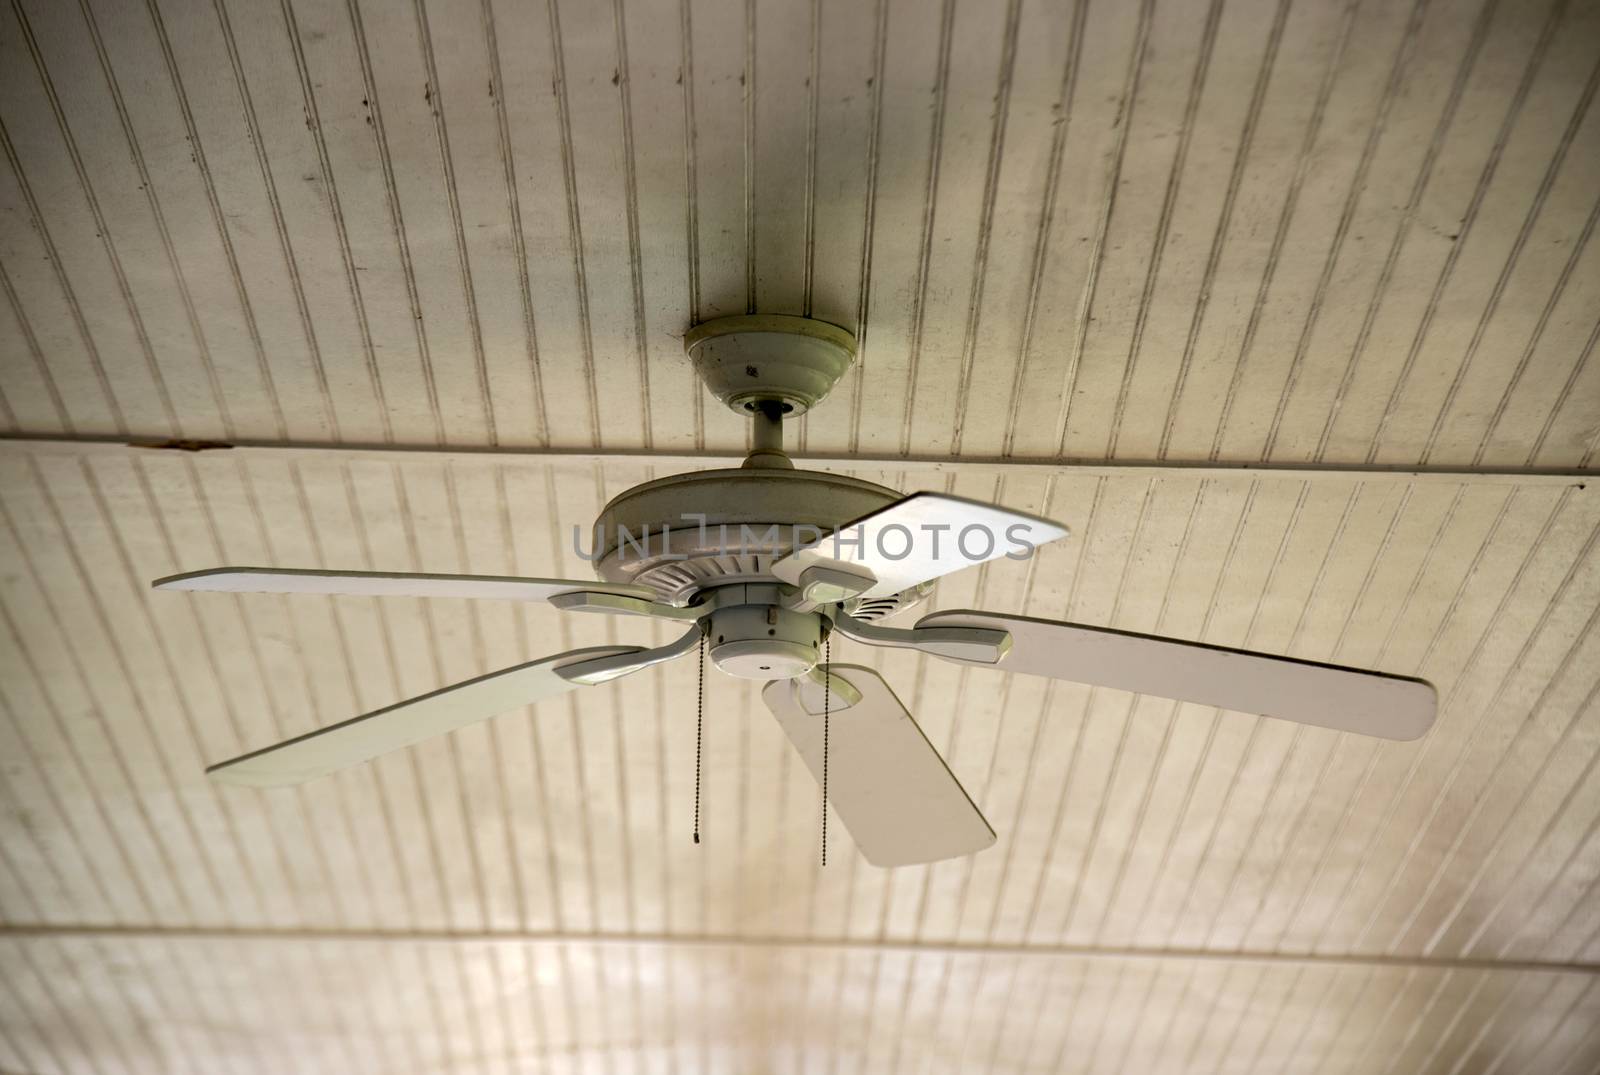 An old ceiling fan against a wooden siding